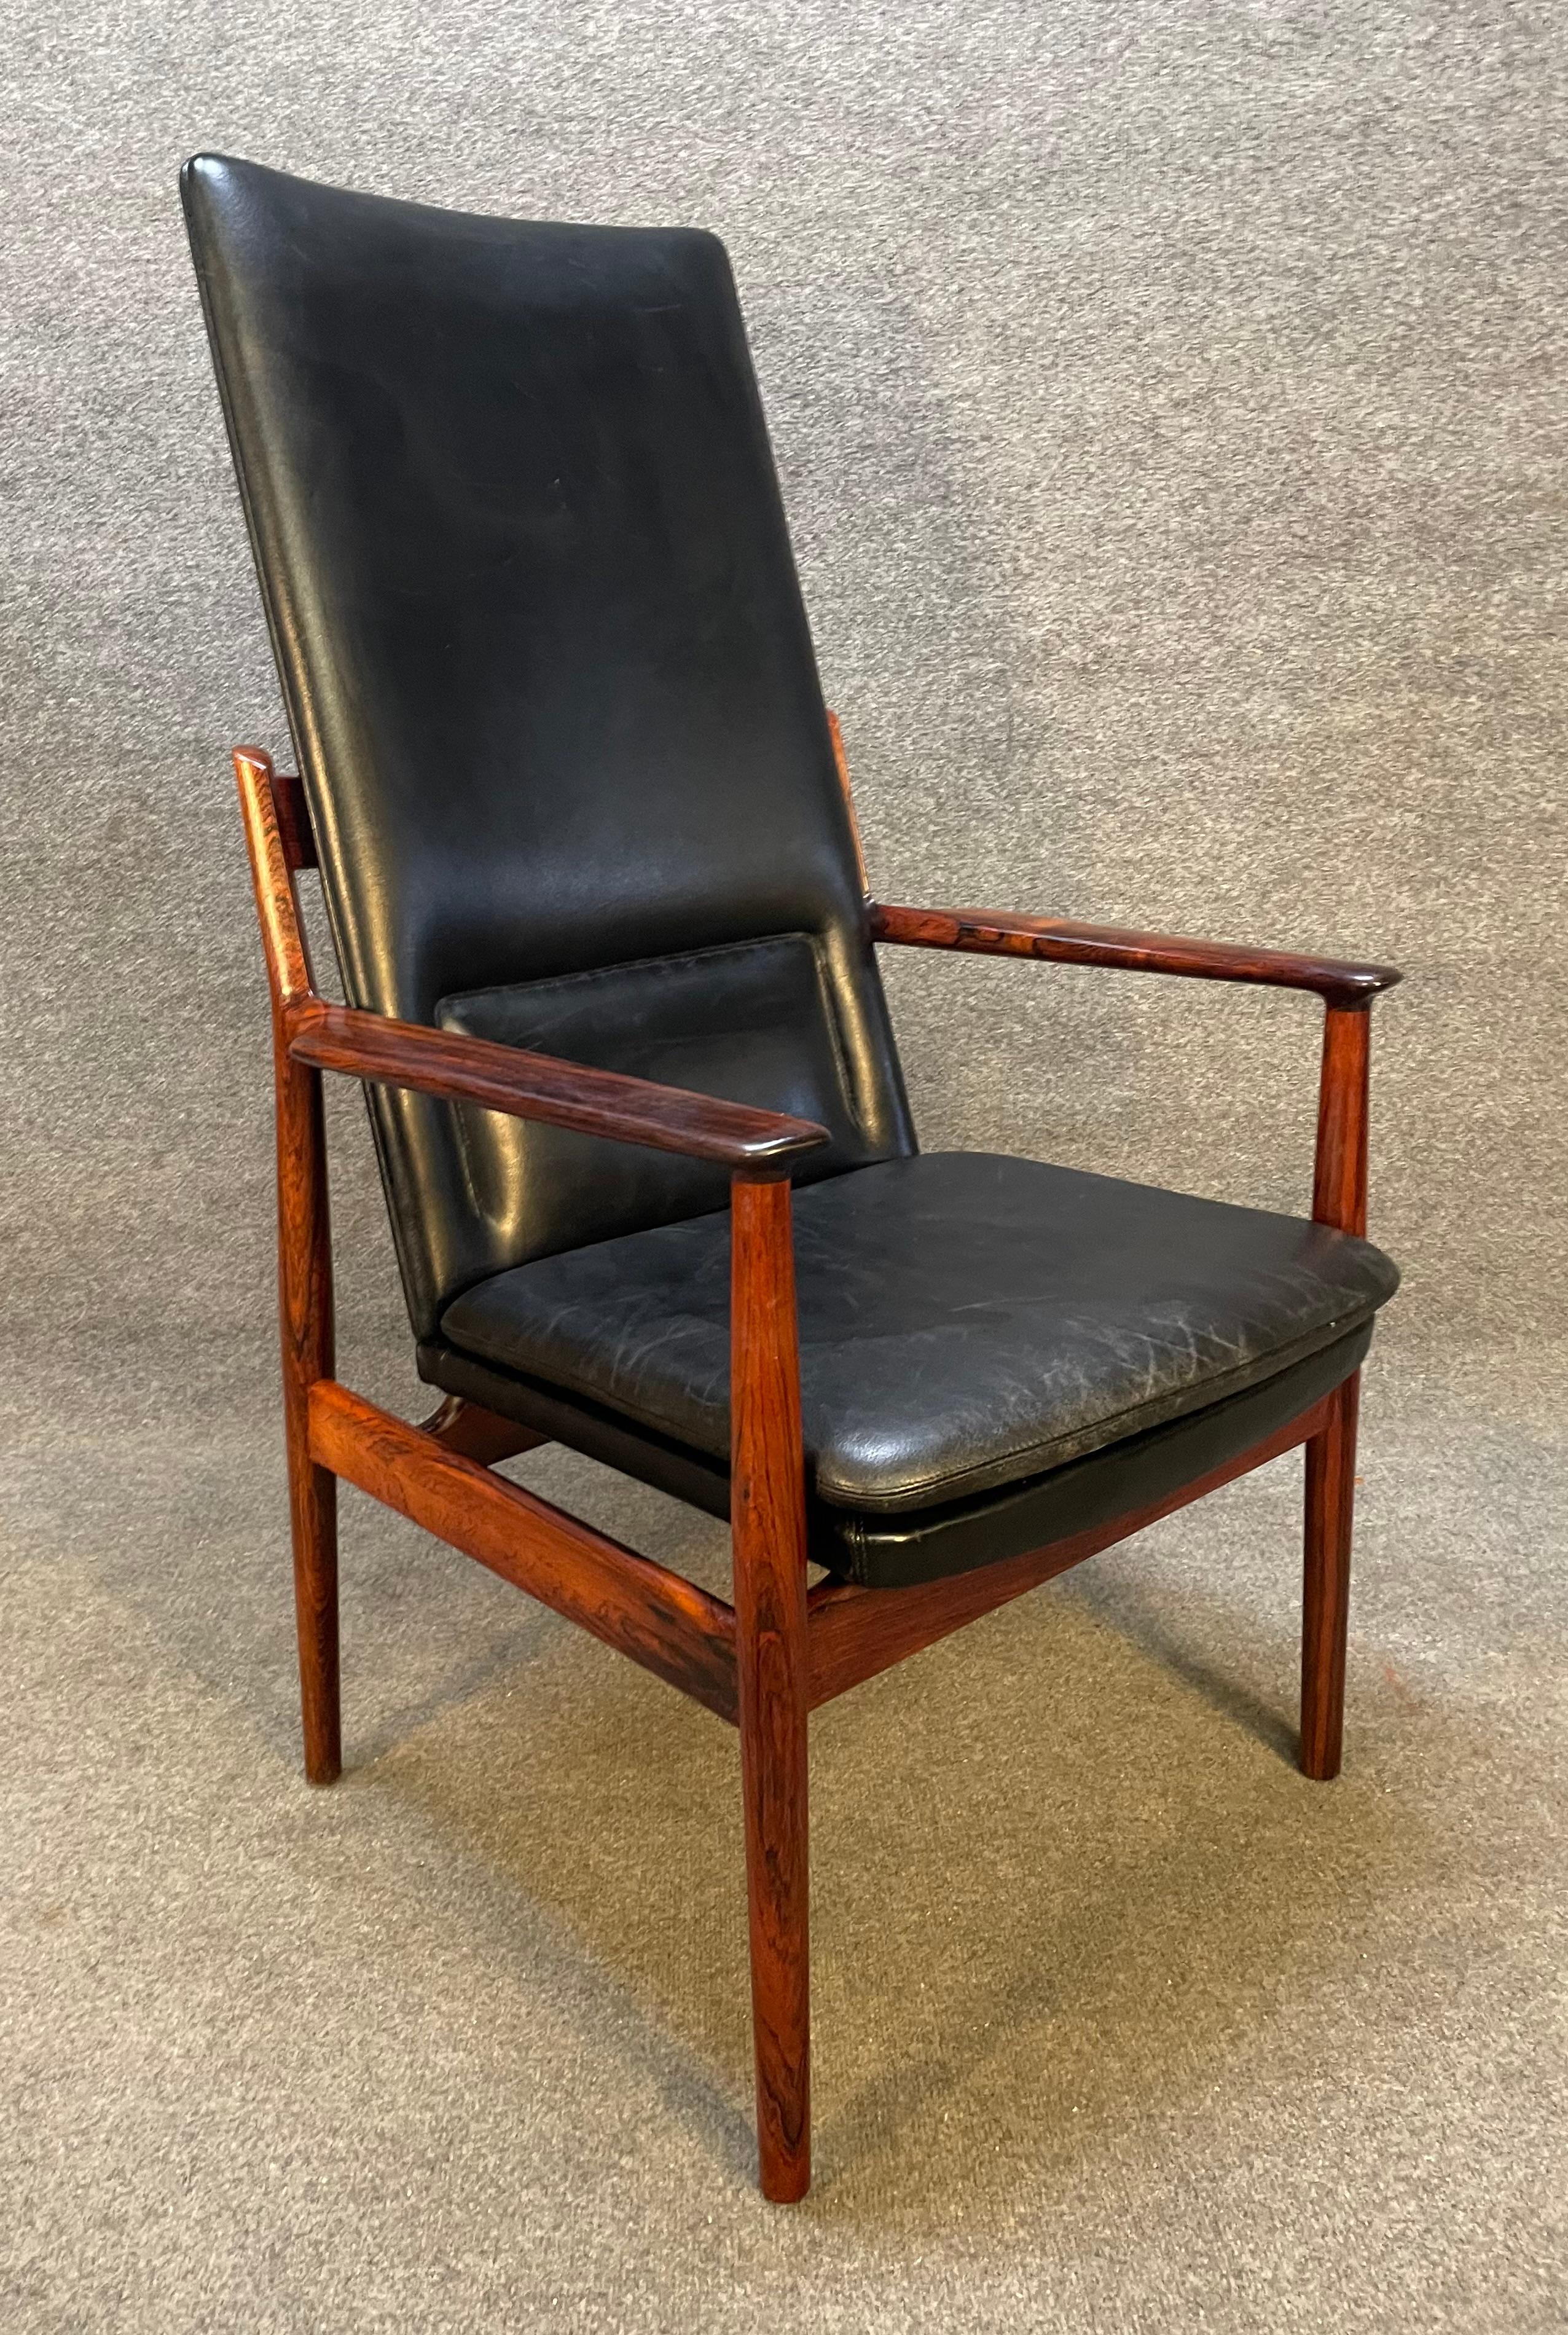 Here is a very rare ultra high back version of the Model 341 chair in rosewood designed by Arne Vodder for Sibast Mobler, Denmark, 1960's.
This comfortable chair, recently imported from Europe to California, features a solid Brazilian rosewood